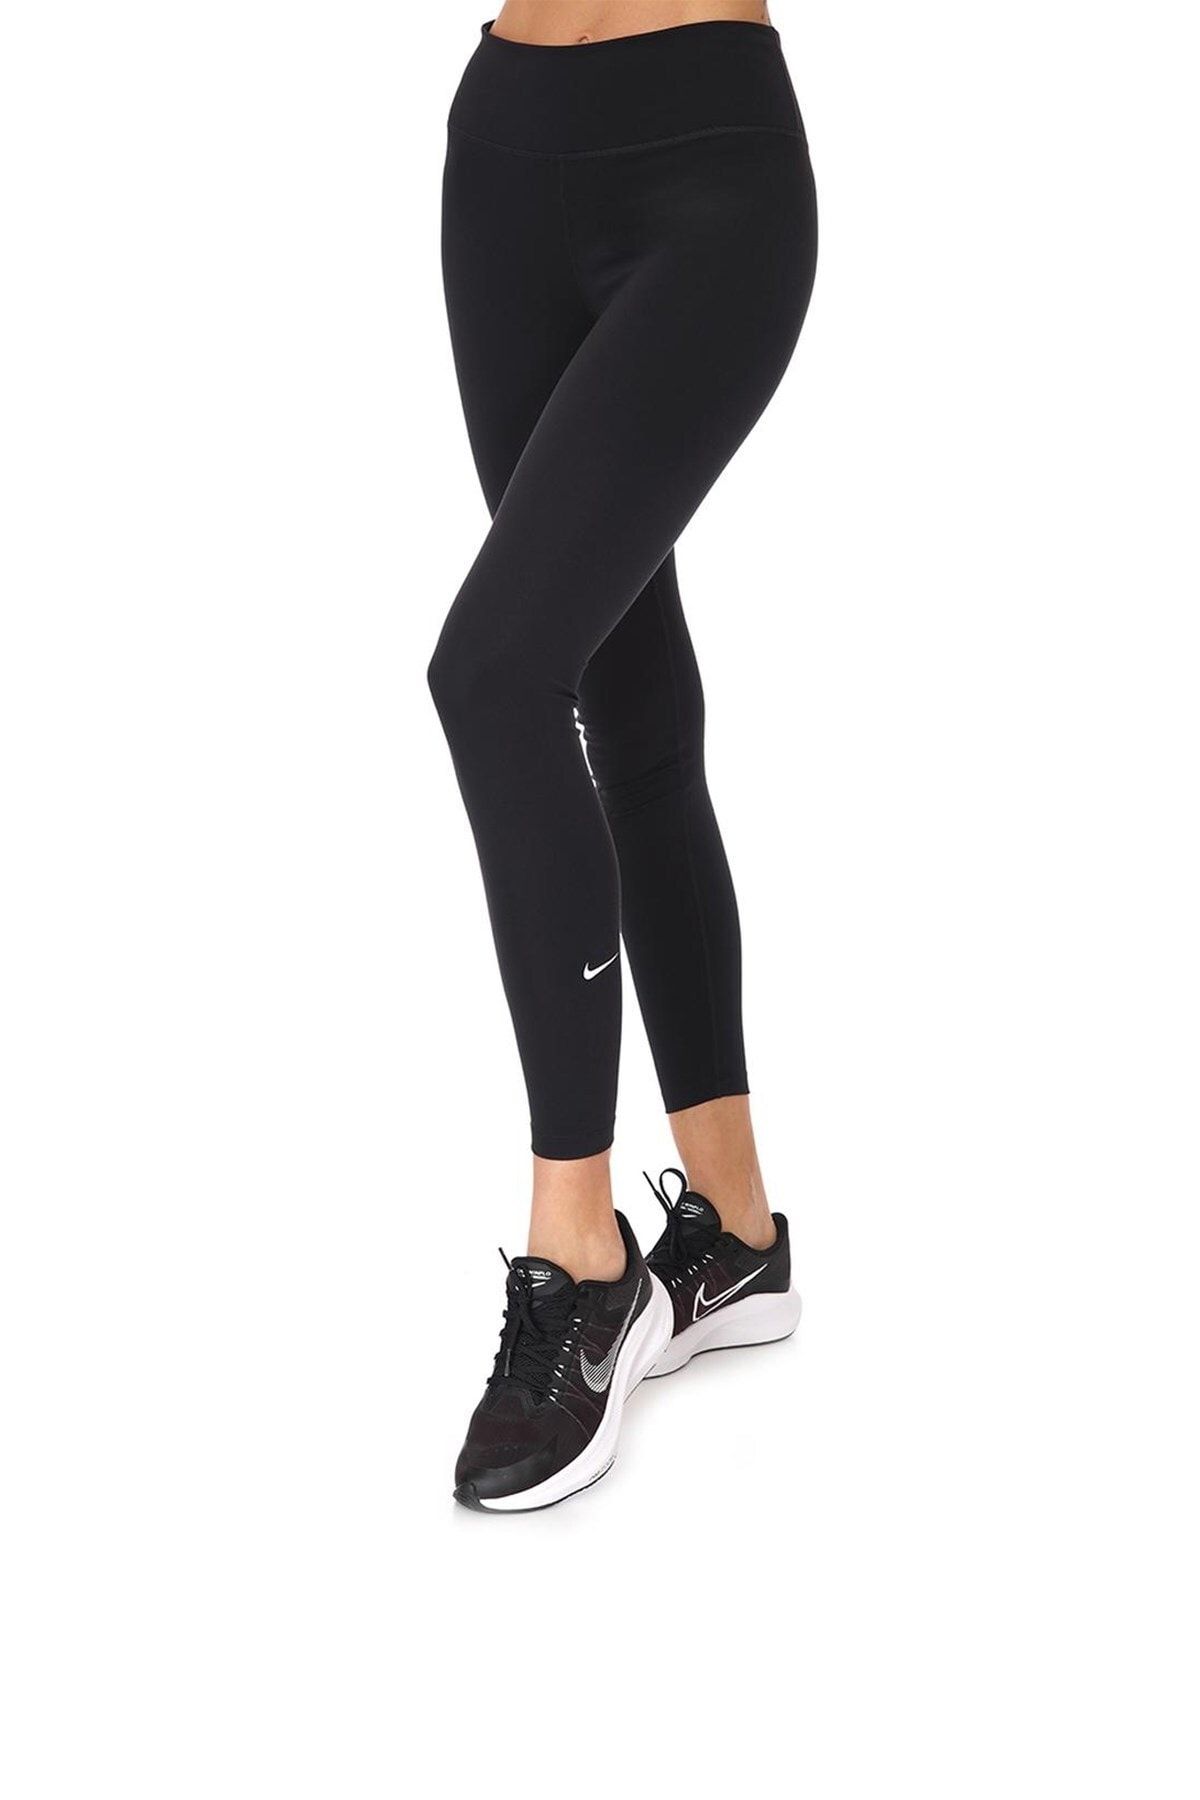 Nike Dd0252-010 One Normal Waisted Women's Tights Long - Trendyol